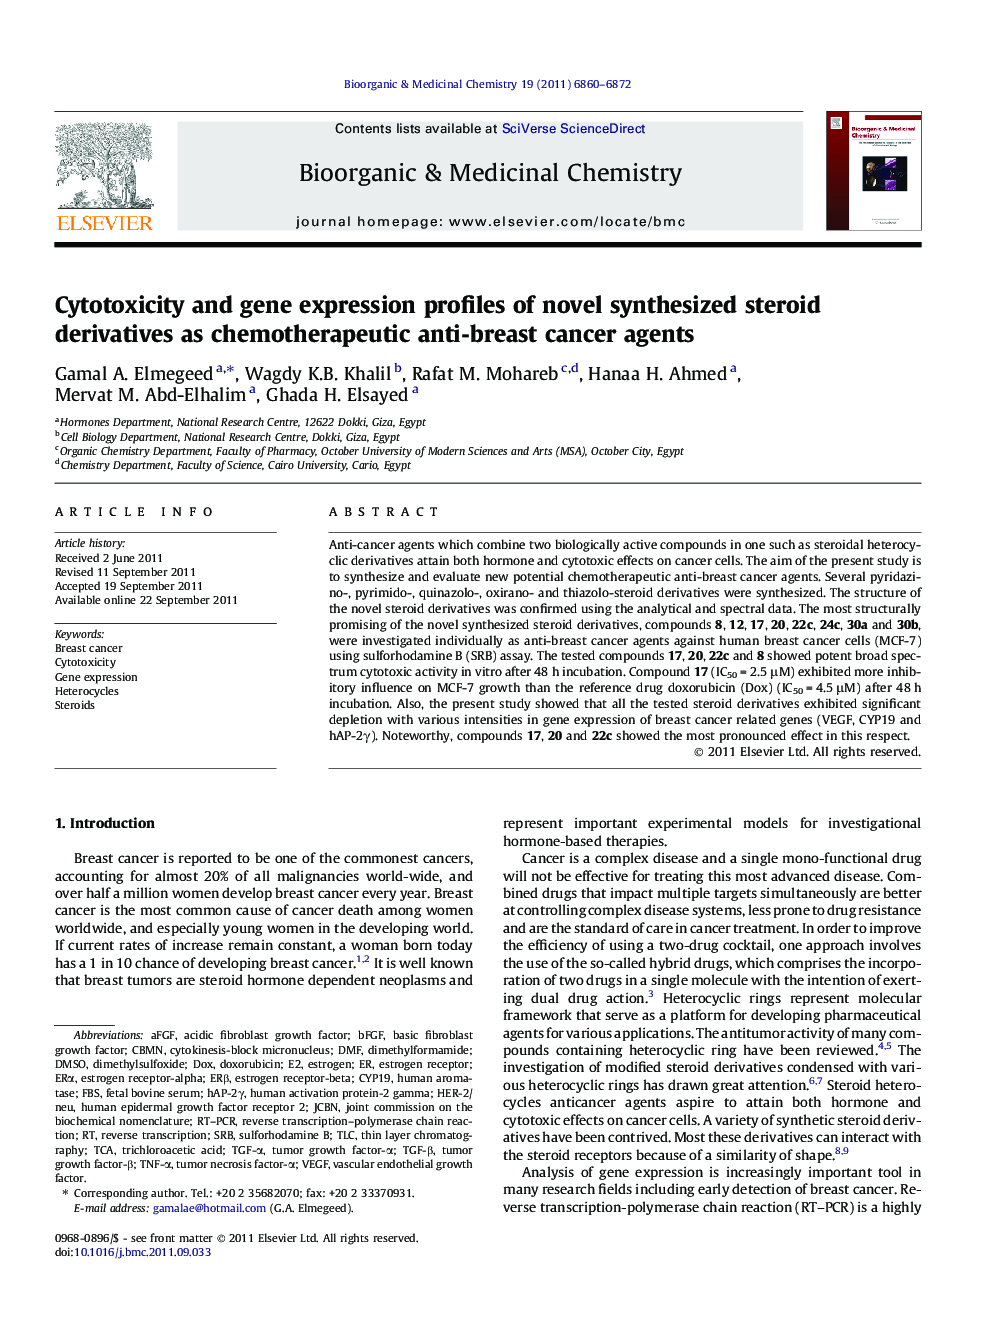 Cytotoxicity and gene expression profiles of novel synthesized steroid derivatives as chemotherapeutic anti-breast cancer agents